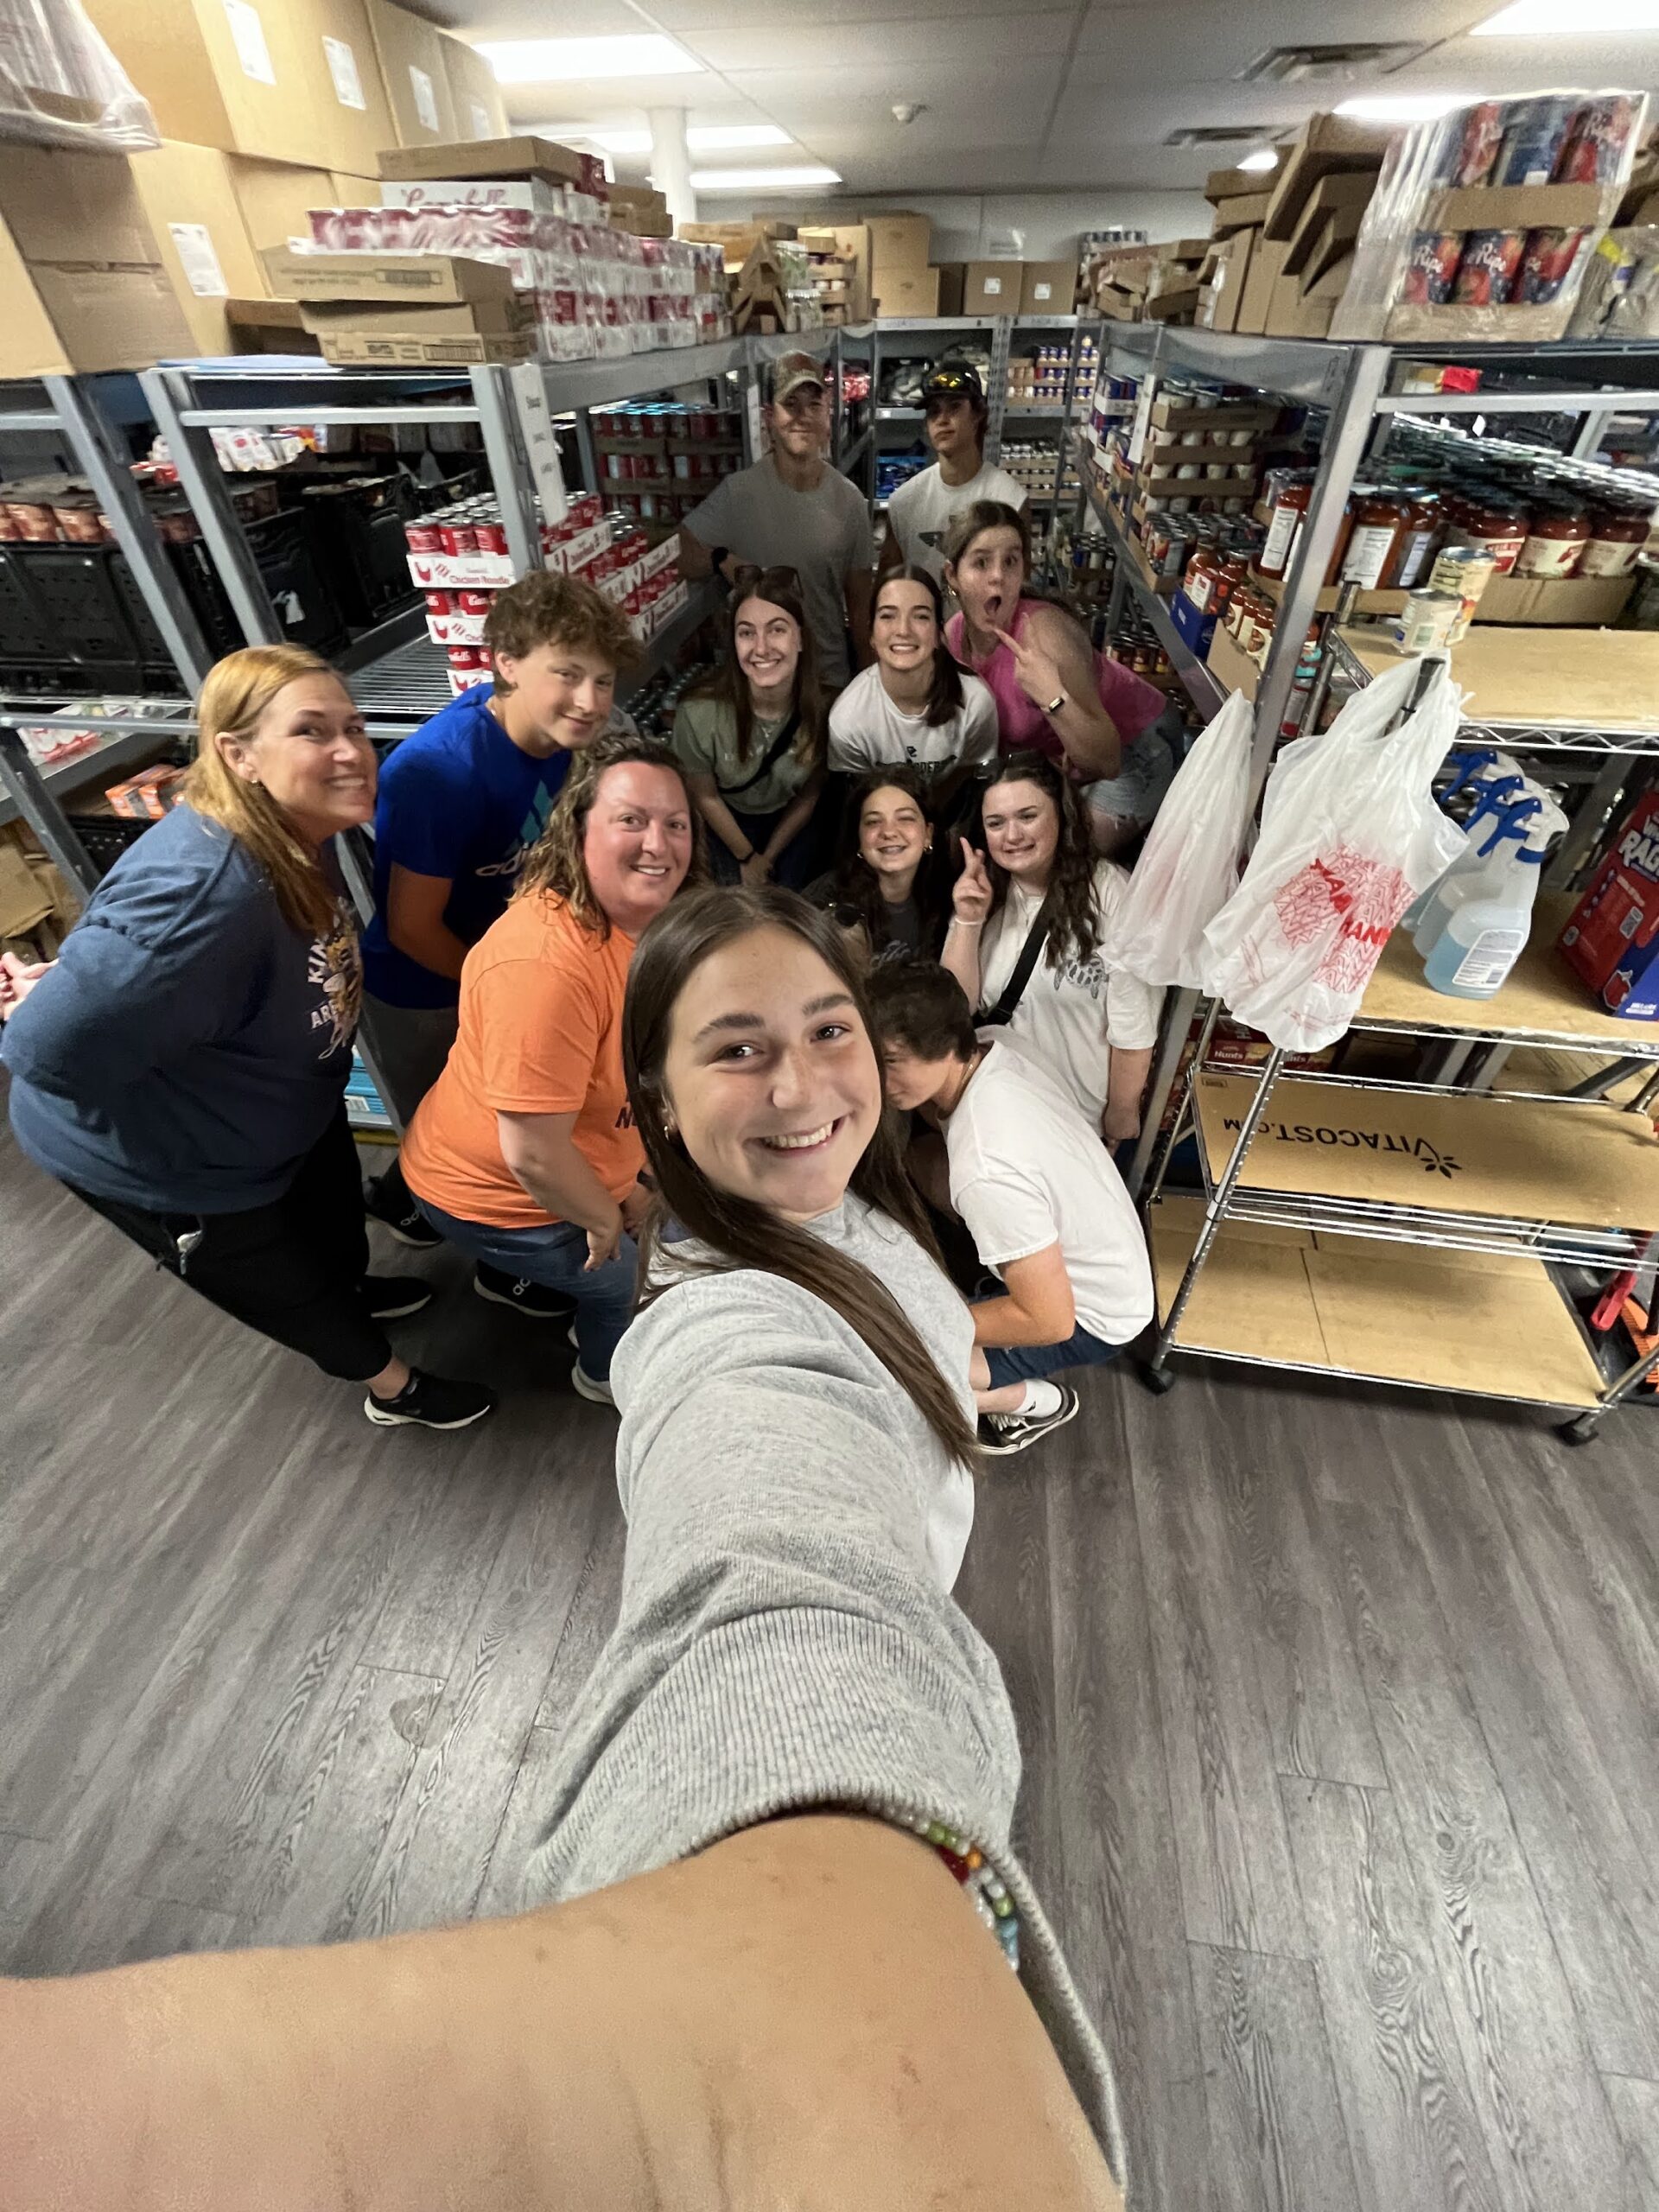 a group of young adults take a selfie in a storeroom.